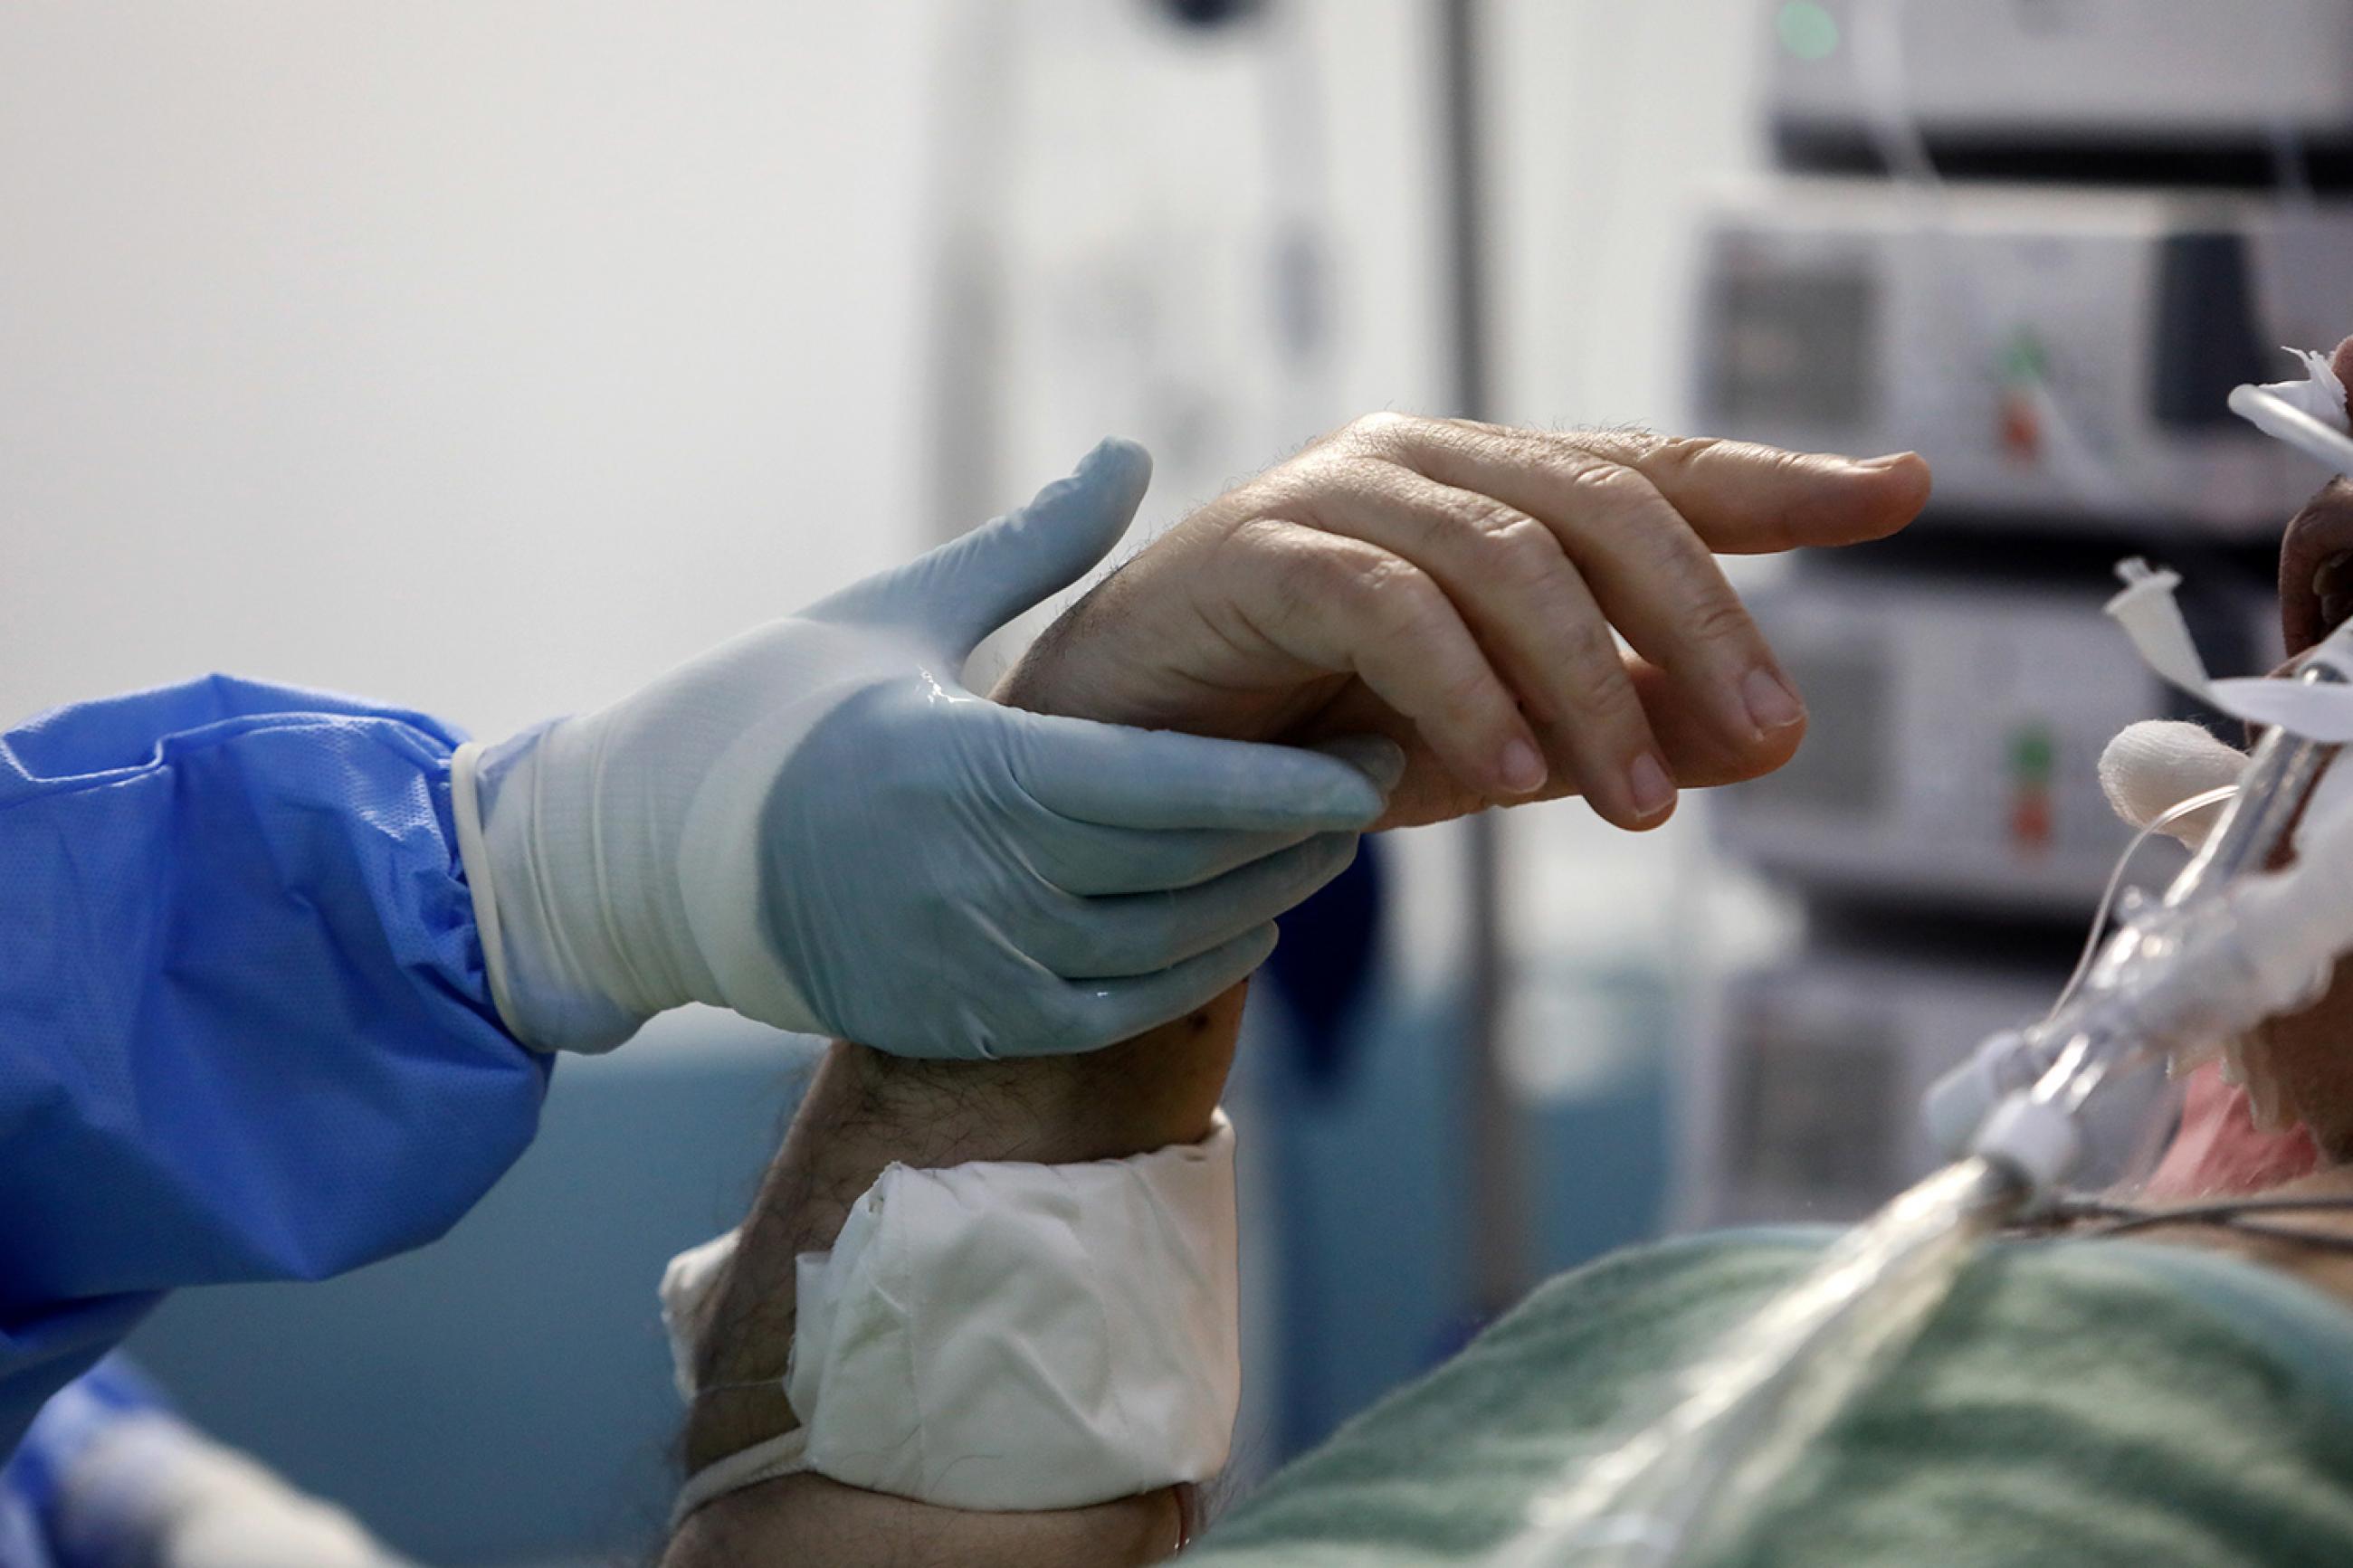 An intubated patient tries to gesture at a medical worker holding his hand at the Sotiria hospital ICU during the coronavirus outbreak, in Athens, Greece, on April 25, 2020. Picture shows the hand of a patient in a hospital bed being held by the blue-gloved hand of a medical worker. REUTERS/Giorgos Moutafis